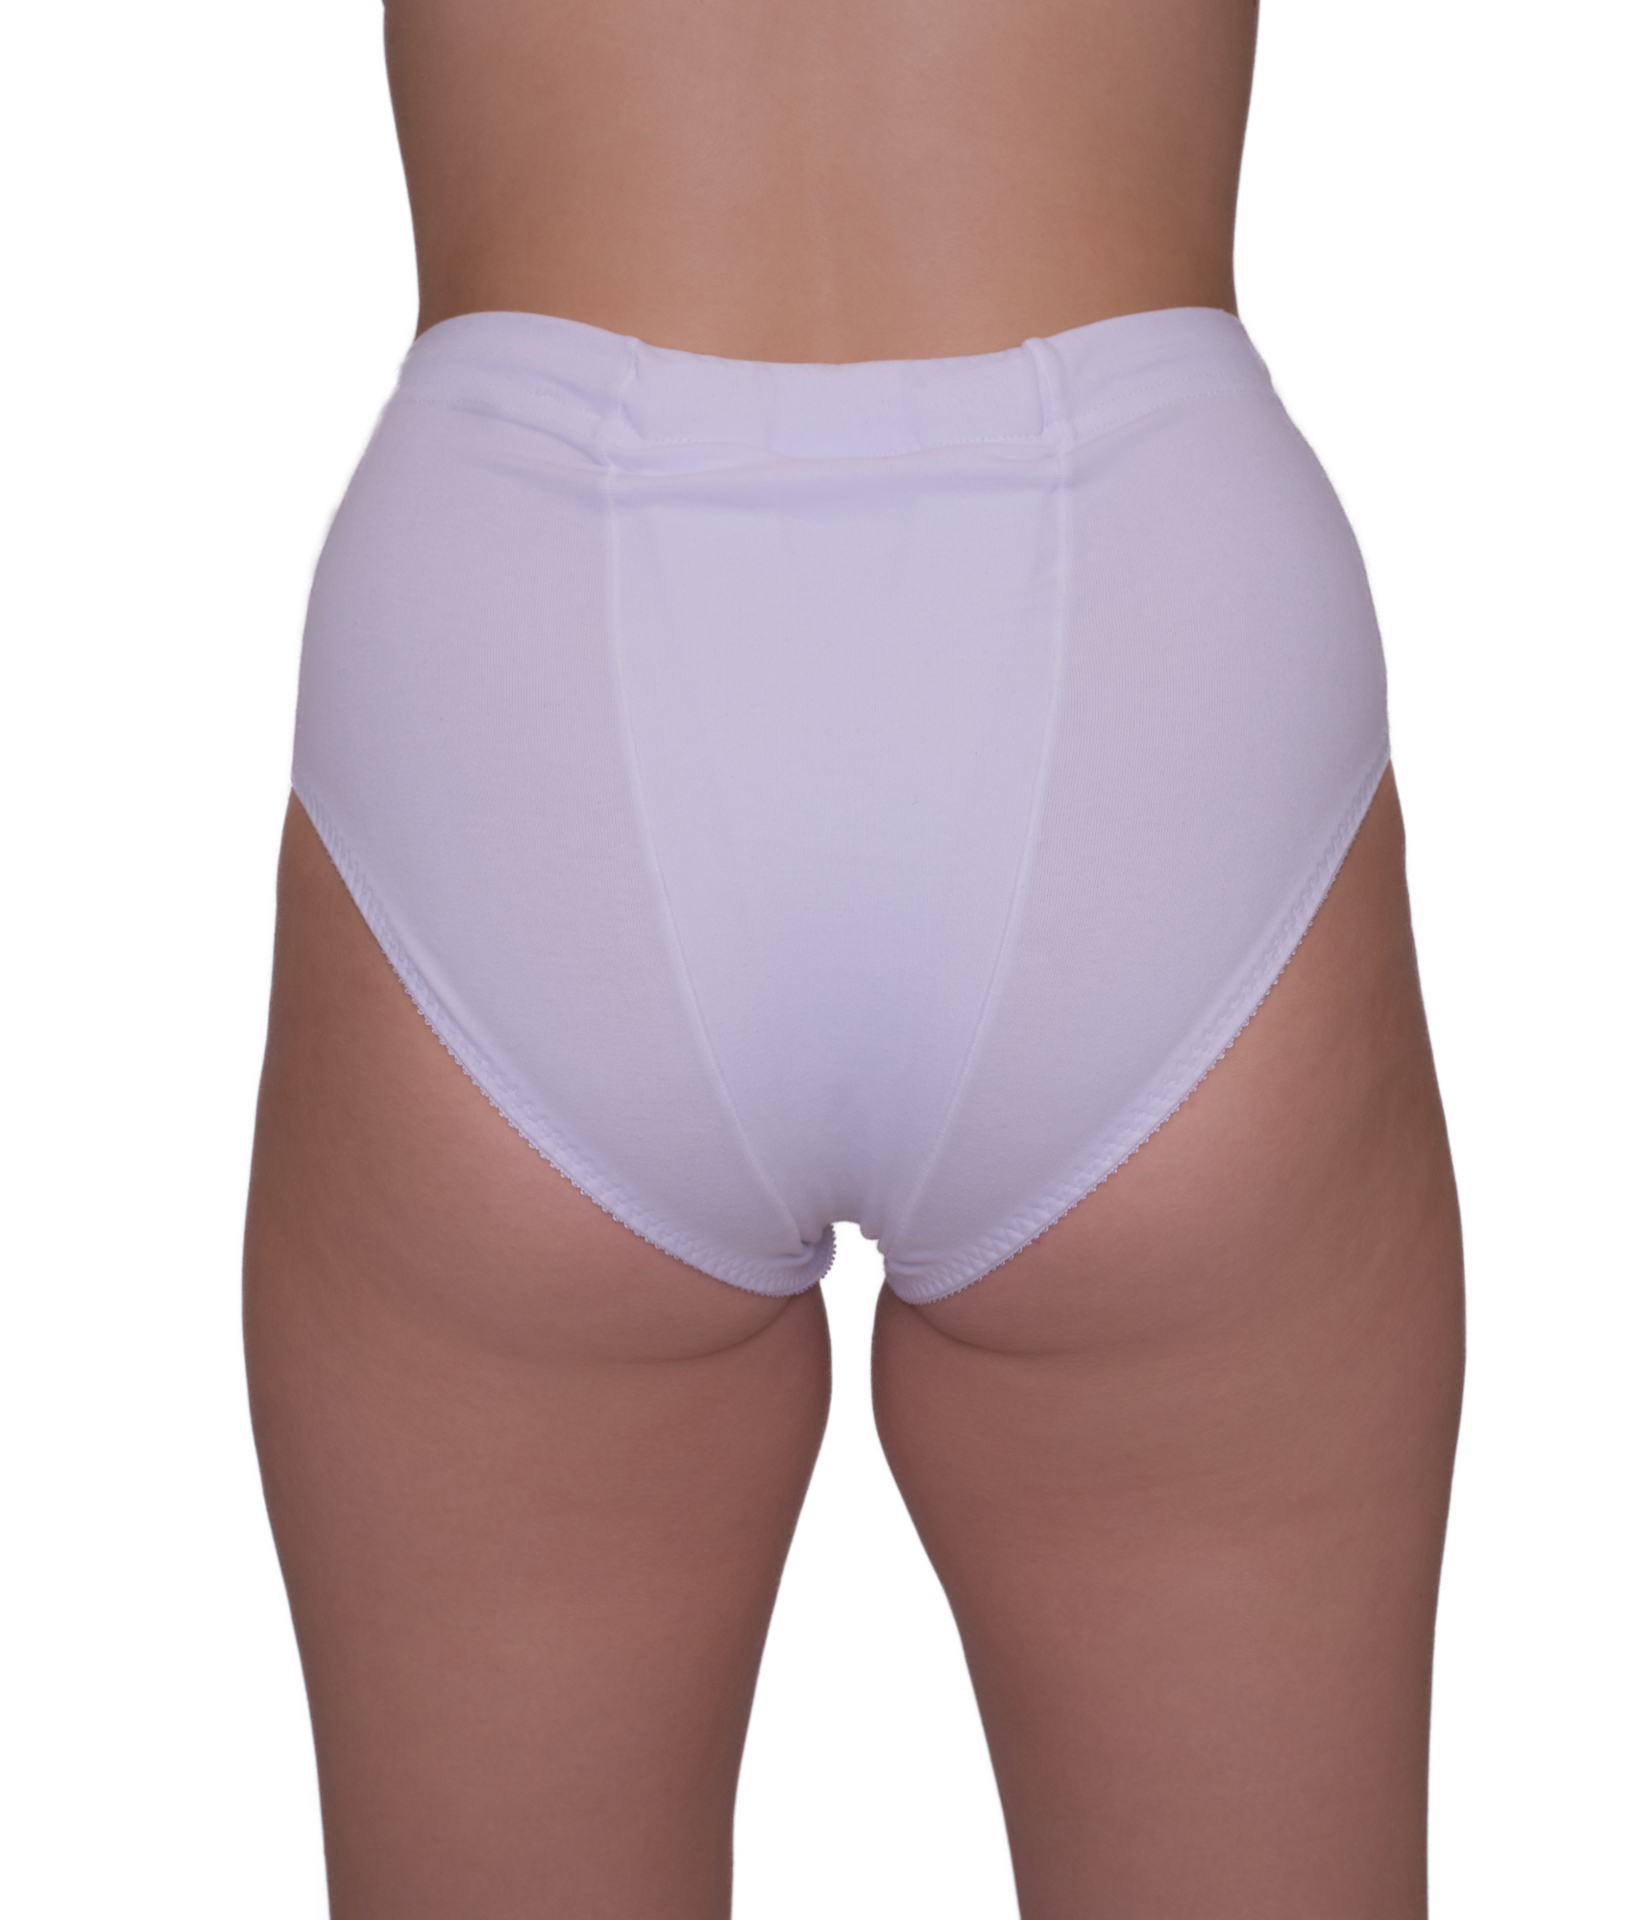 Vulvar Varicosity and Prolapse Support Brief Groin Compression